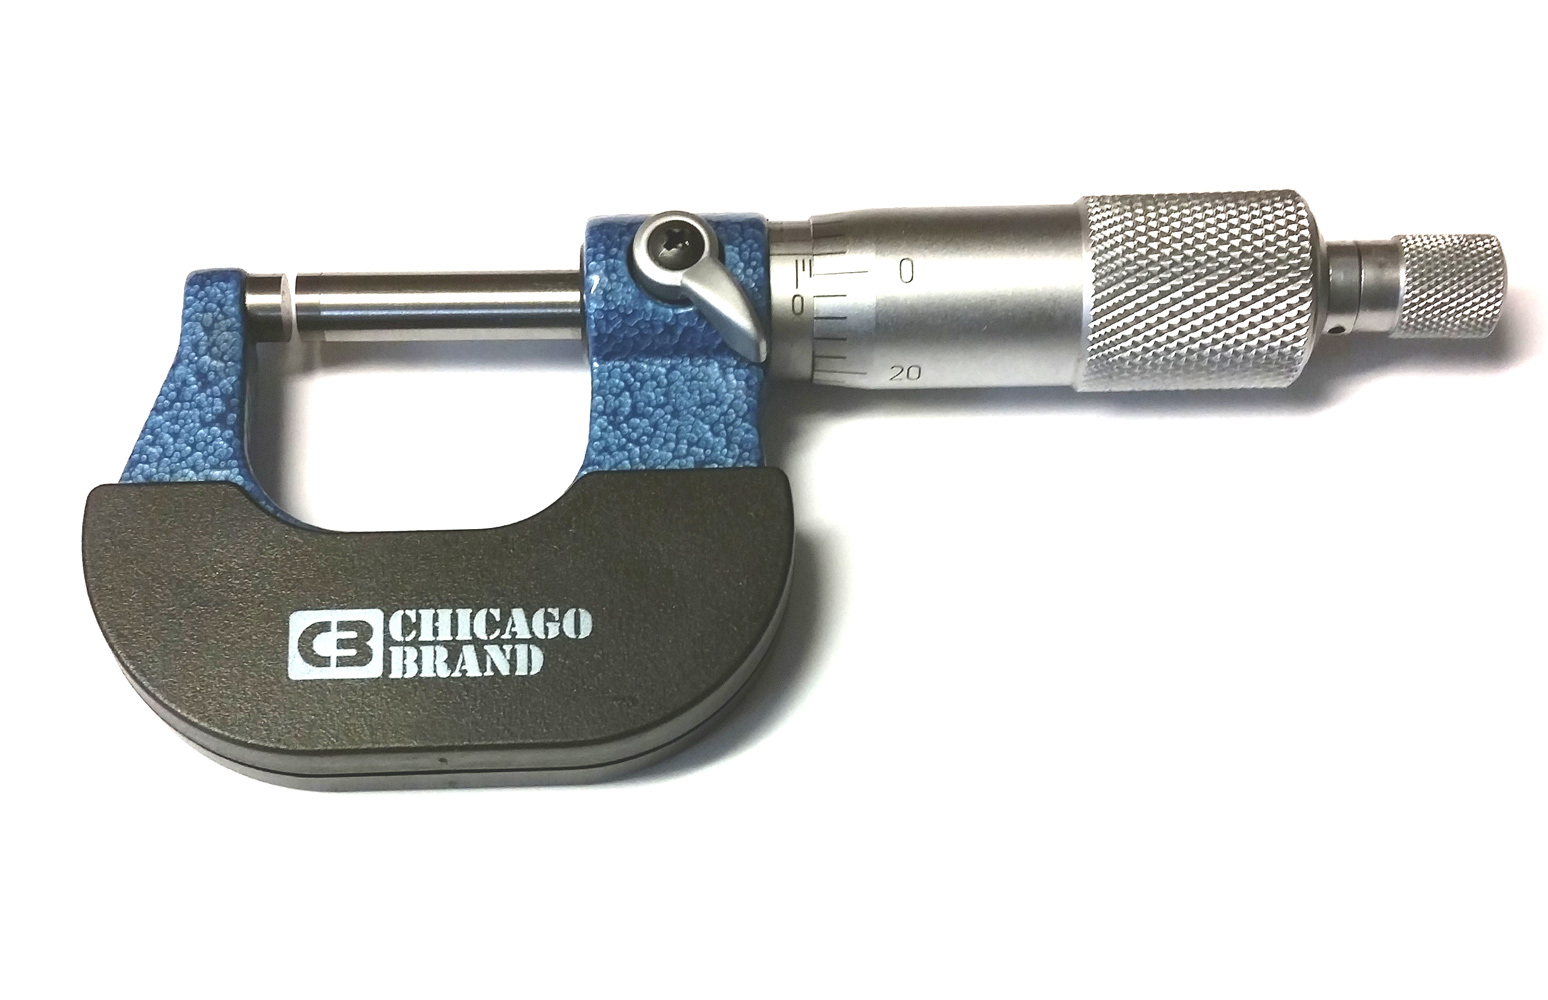 4-5 Standard Micrometer Reads .0001 with Ratchet Stop 1 Year Warranty Chicago Brand #50068